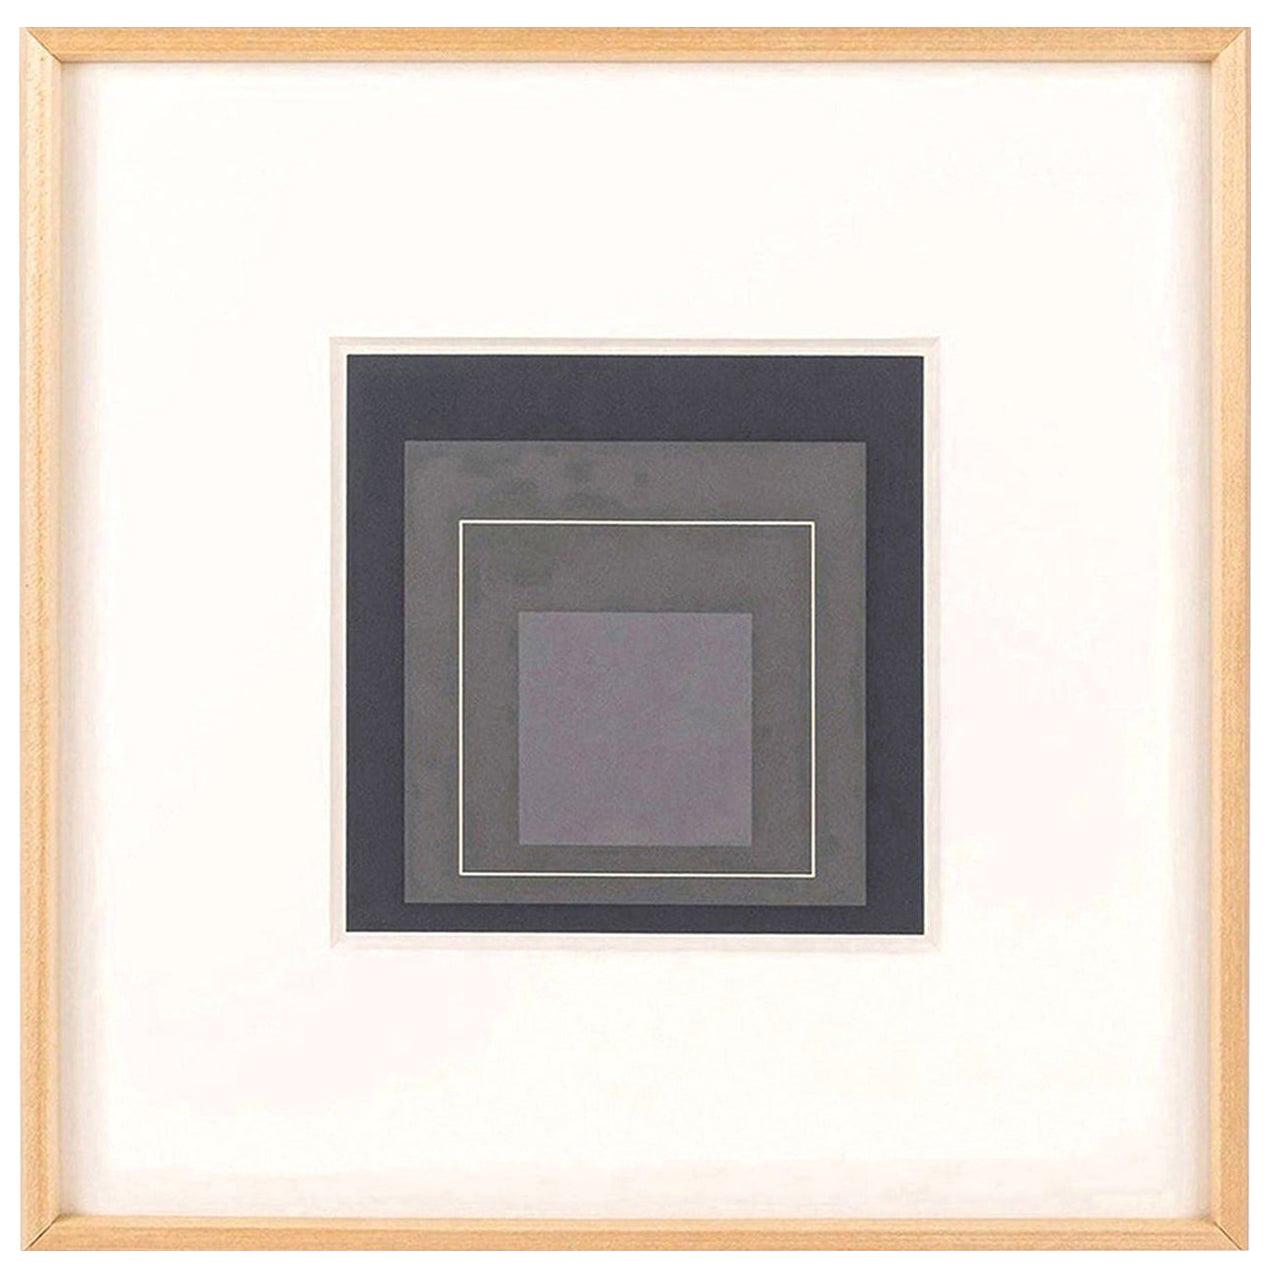 Paper Homage to the Square Serigraph by Josef Albers